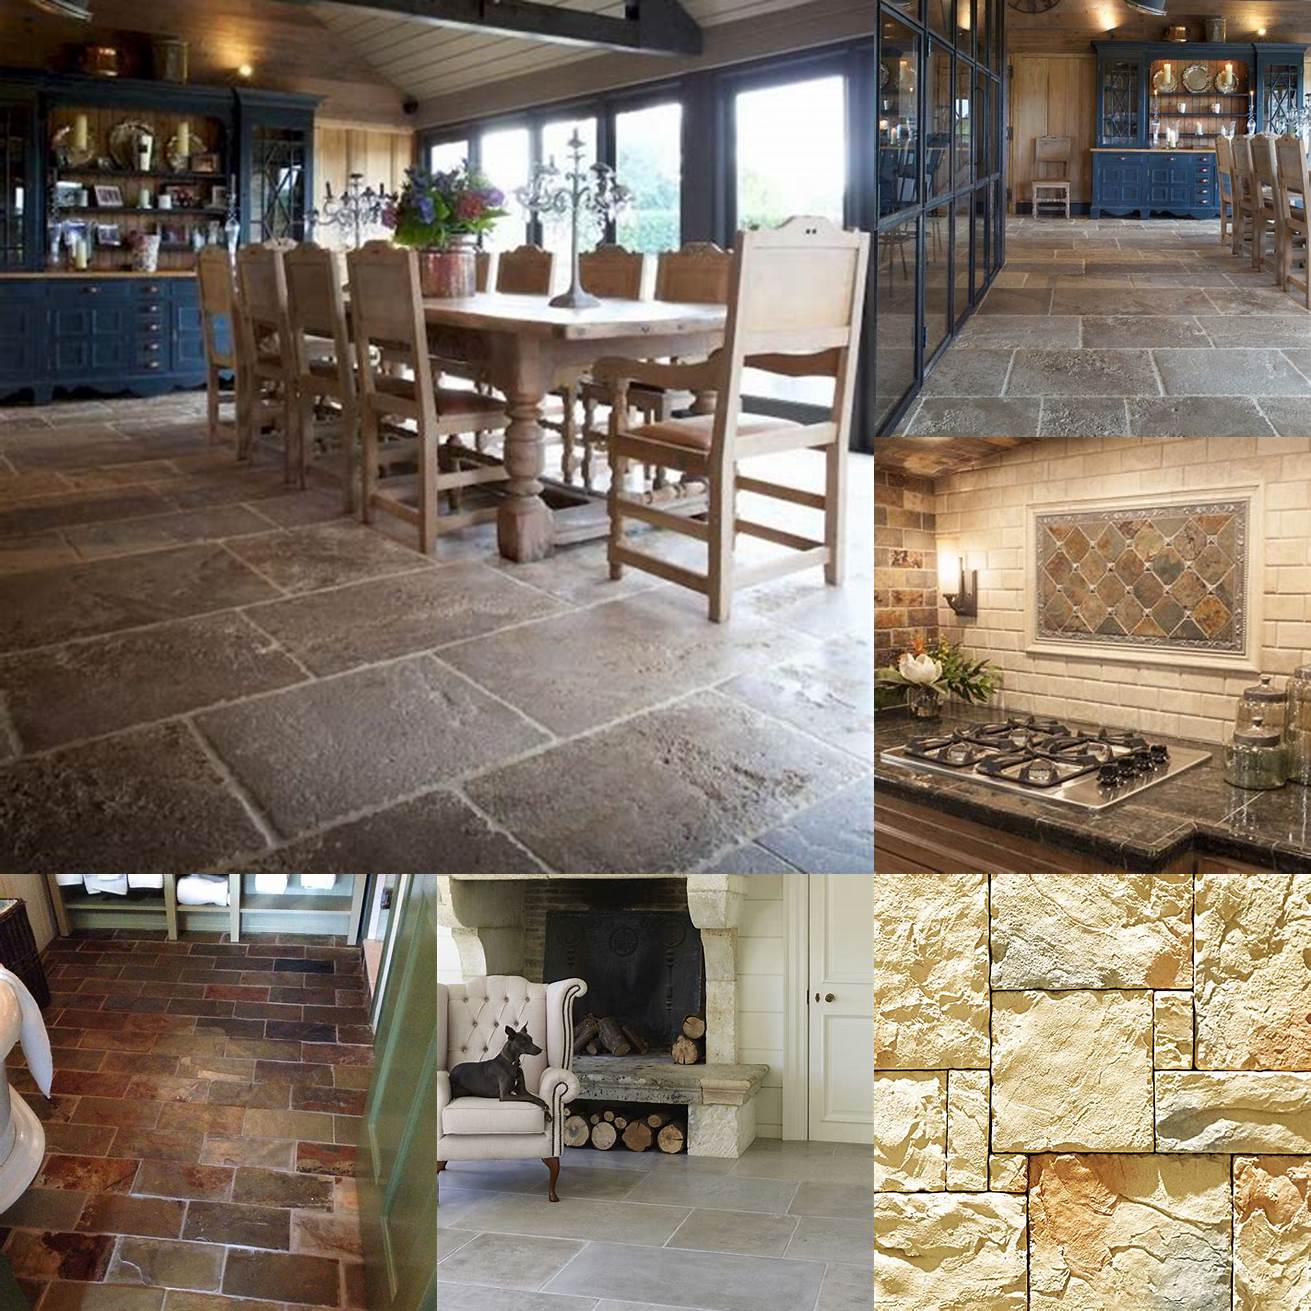 Natural stone tiles with a rustic finish